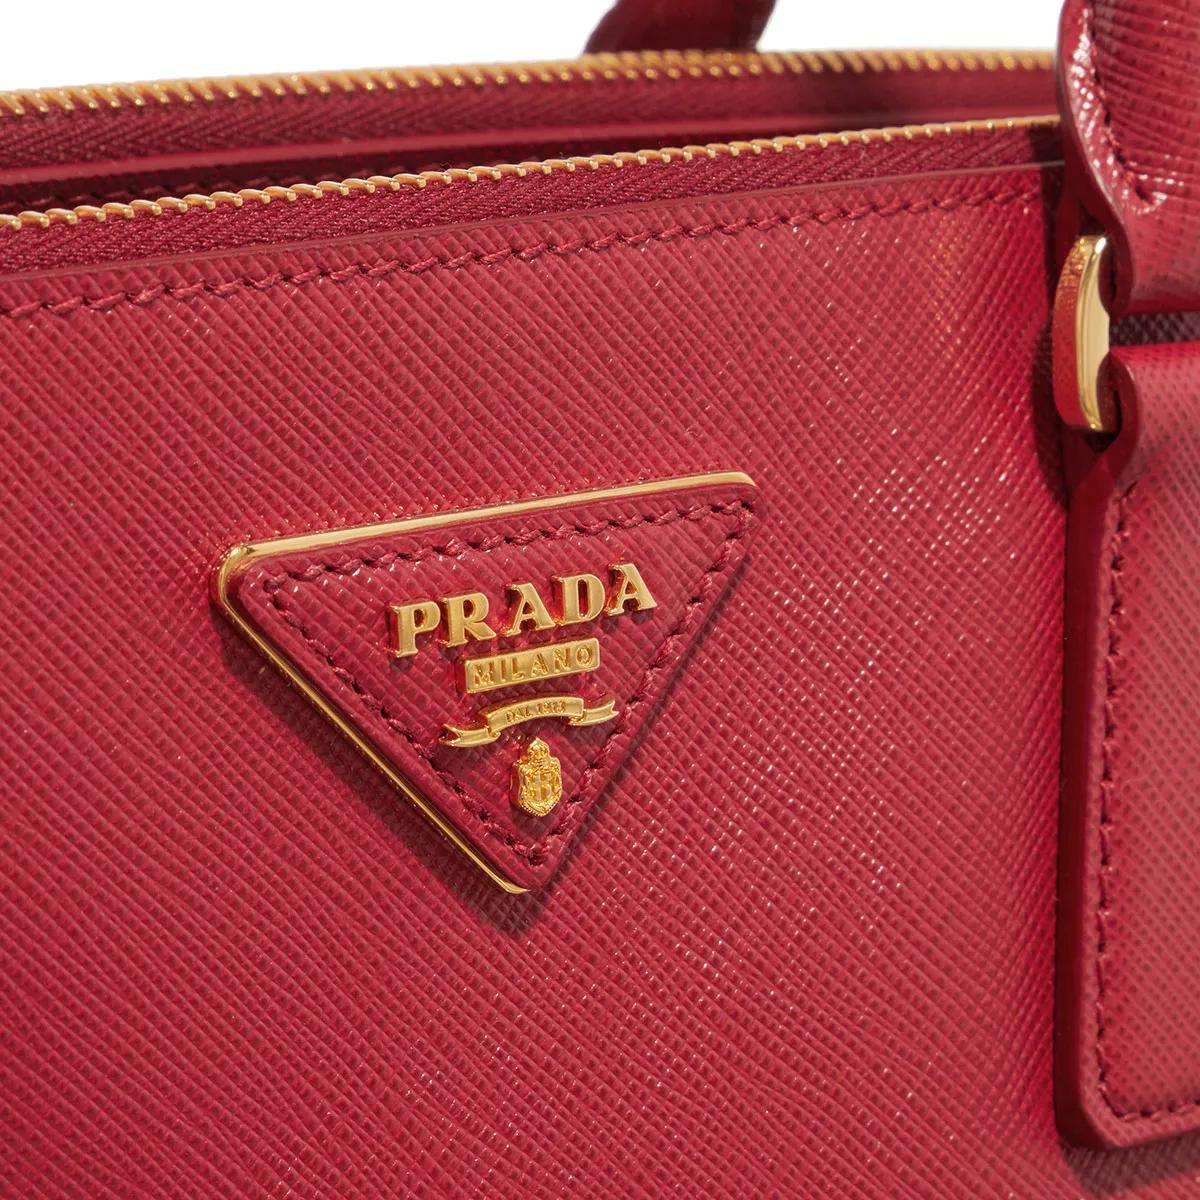 Prada Galleria Large Bag in Fiery Red Saffiano Leather ref.493789